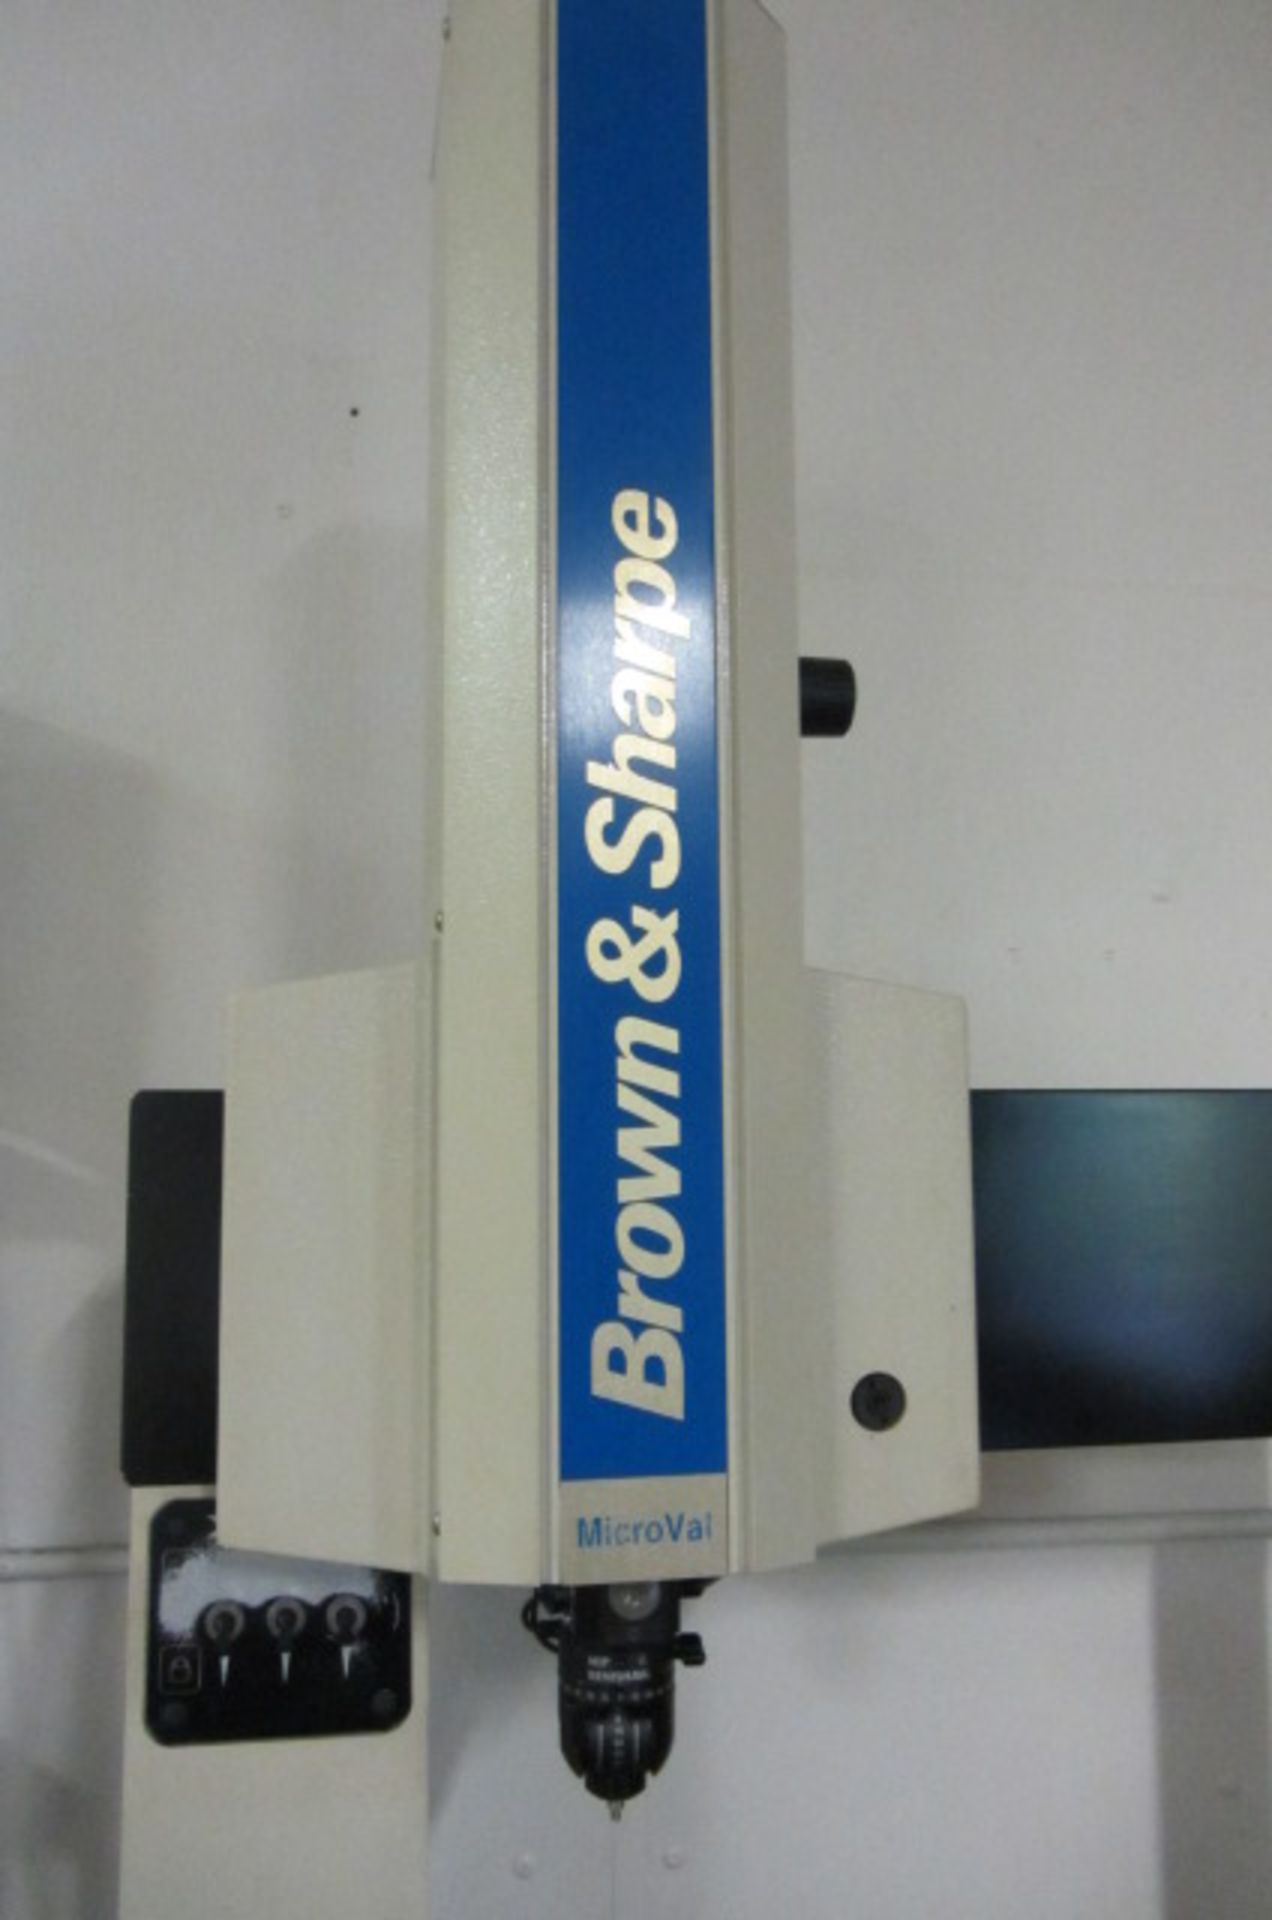 Brown & Sharpe Microval Coordinate Measuring Machine with 20'' L x 16'' W x 12'' H Capacity, MIP - Image 2 of 6